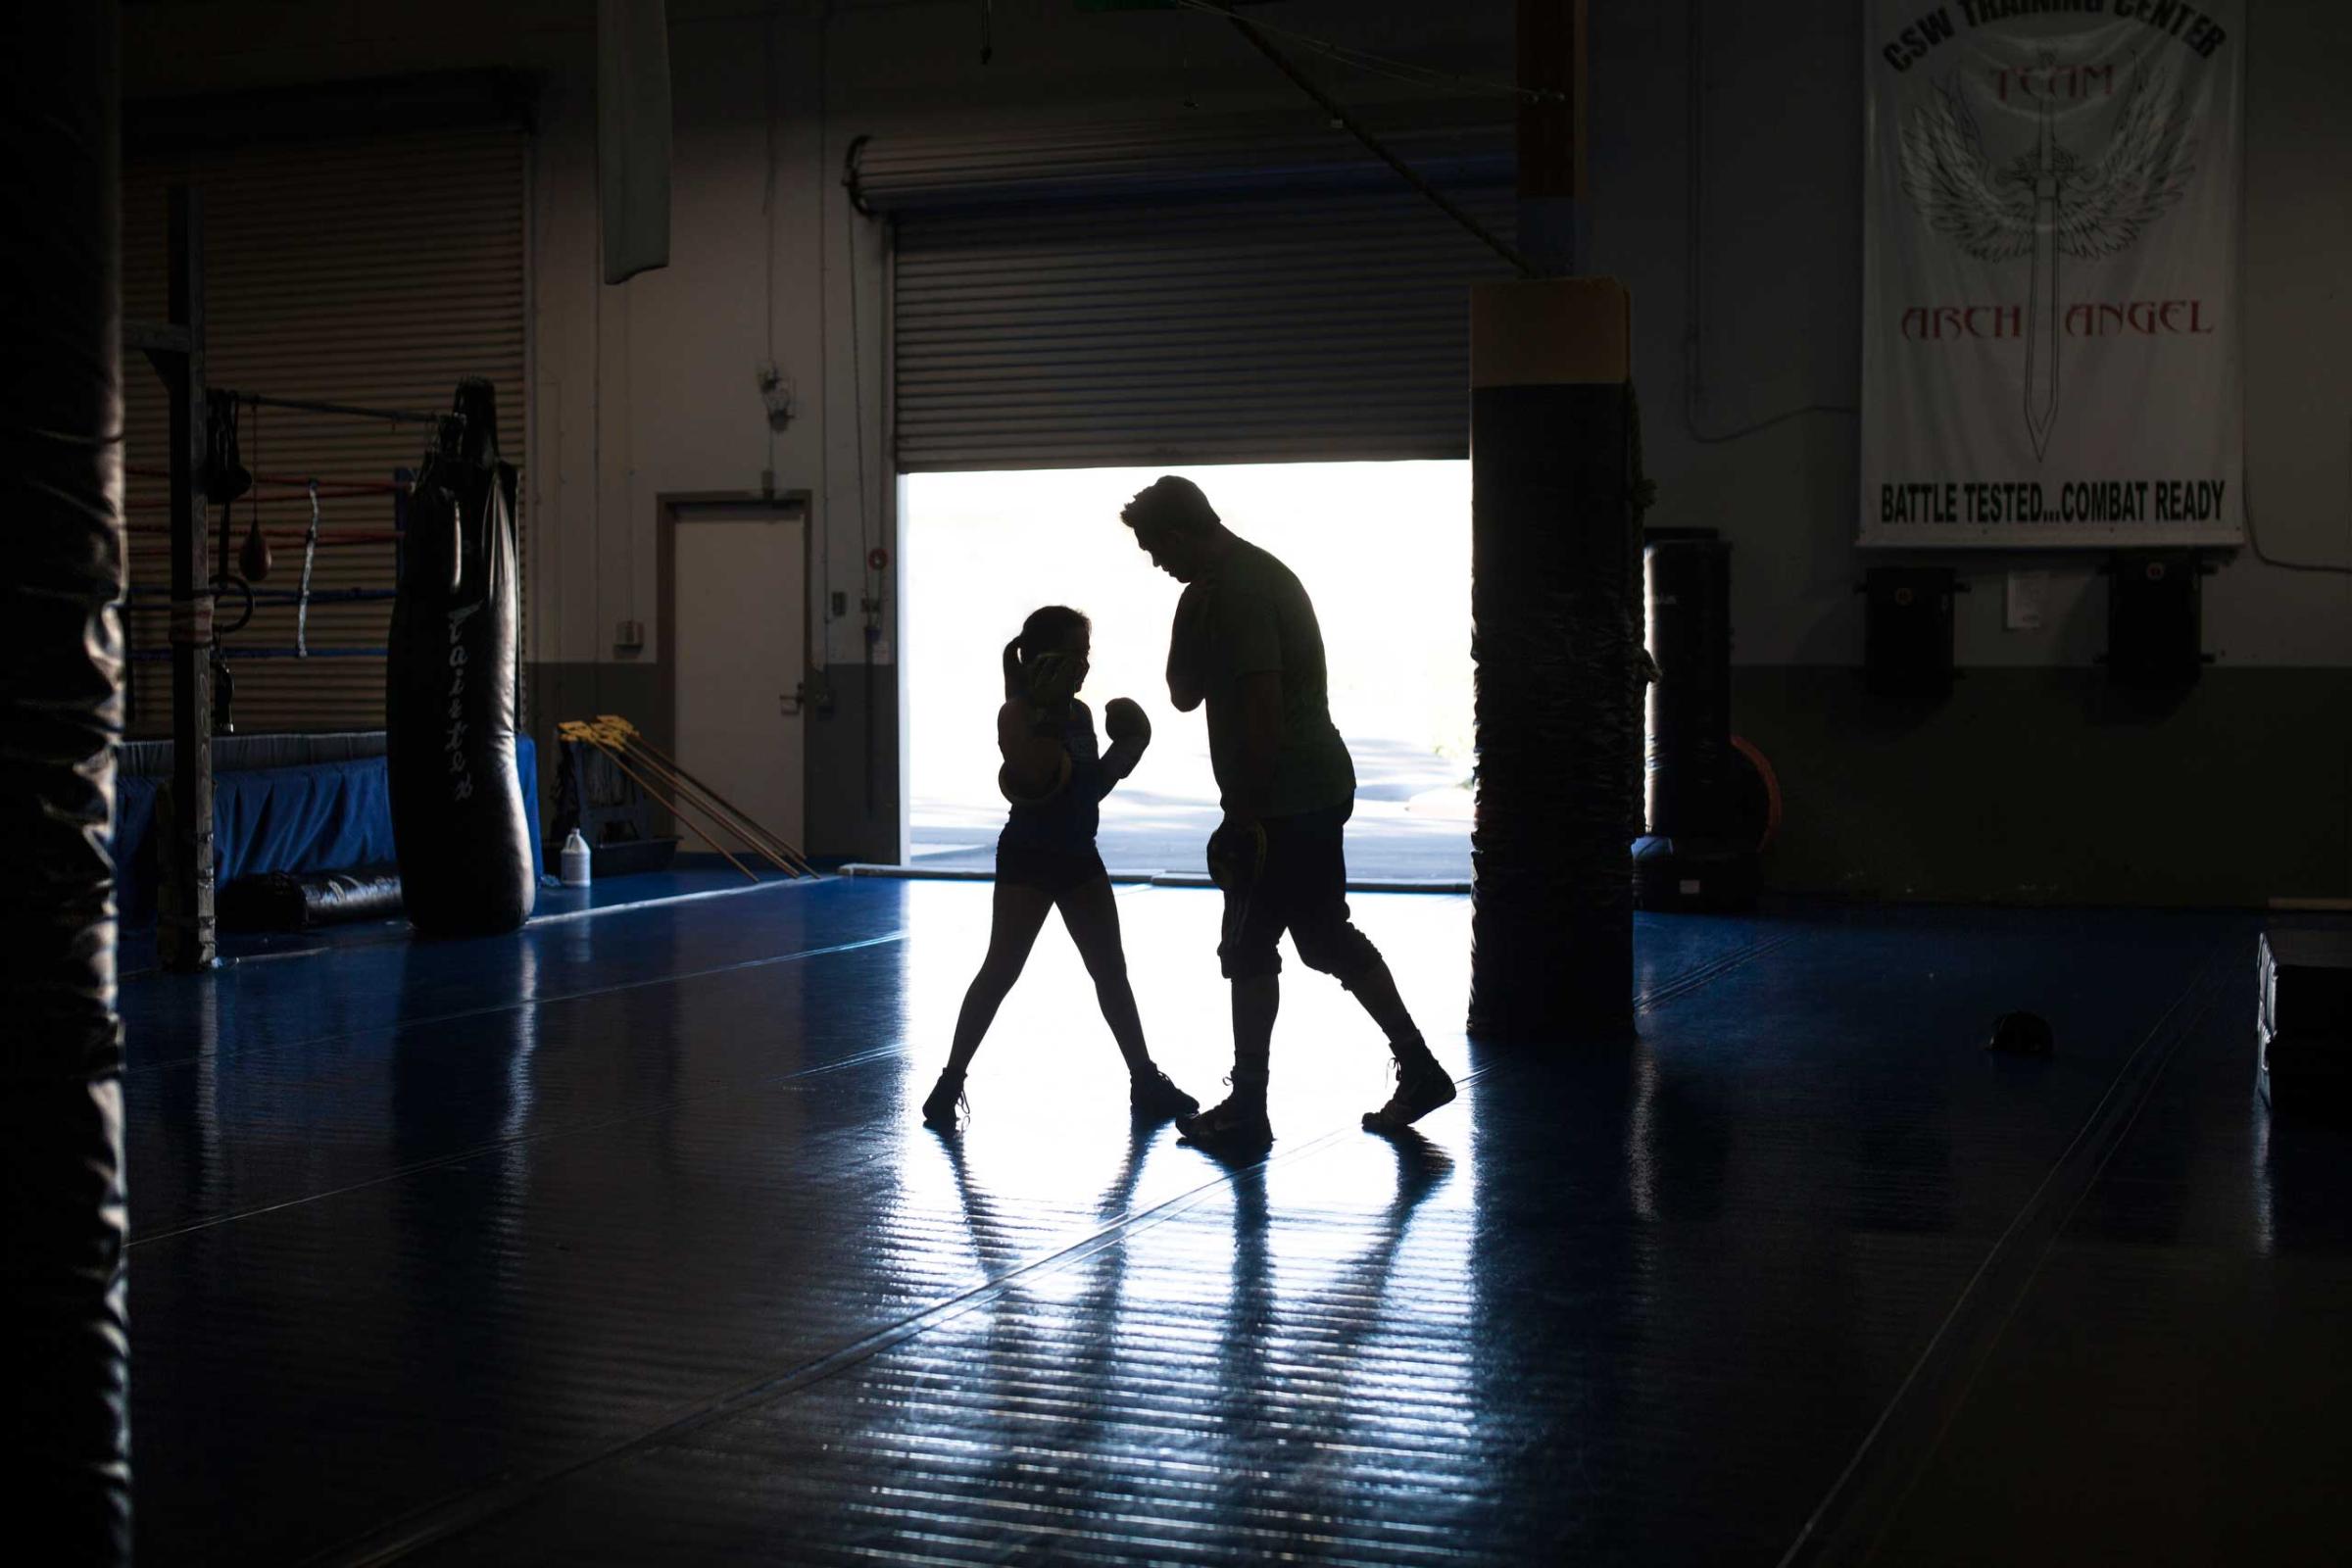 Cheyenne Bowman, 11, at personal MMA practice with coach Craig Wilkerson, a professional MMA fighter. La Habra, Calif,. Nov. 2013.